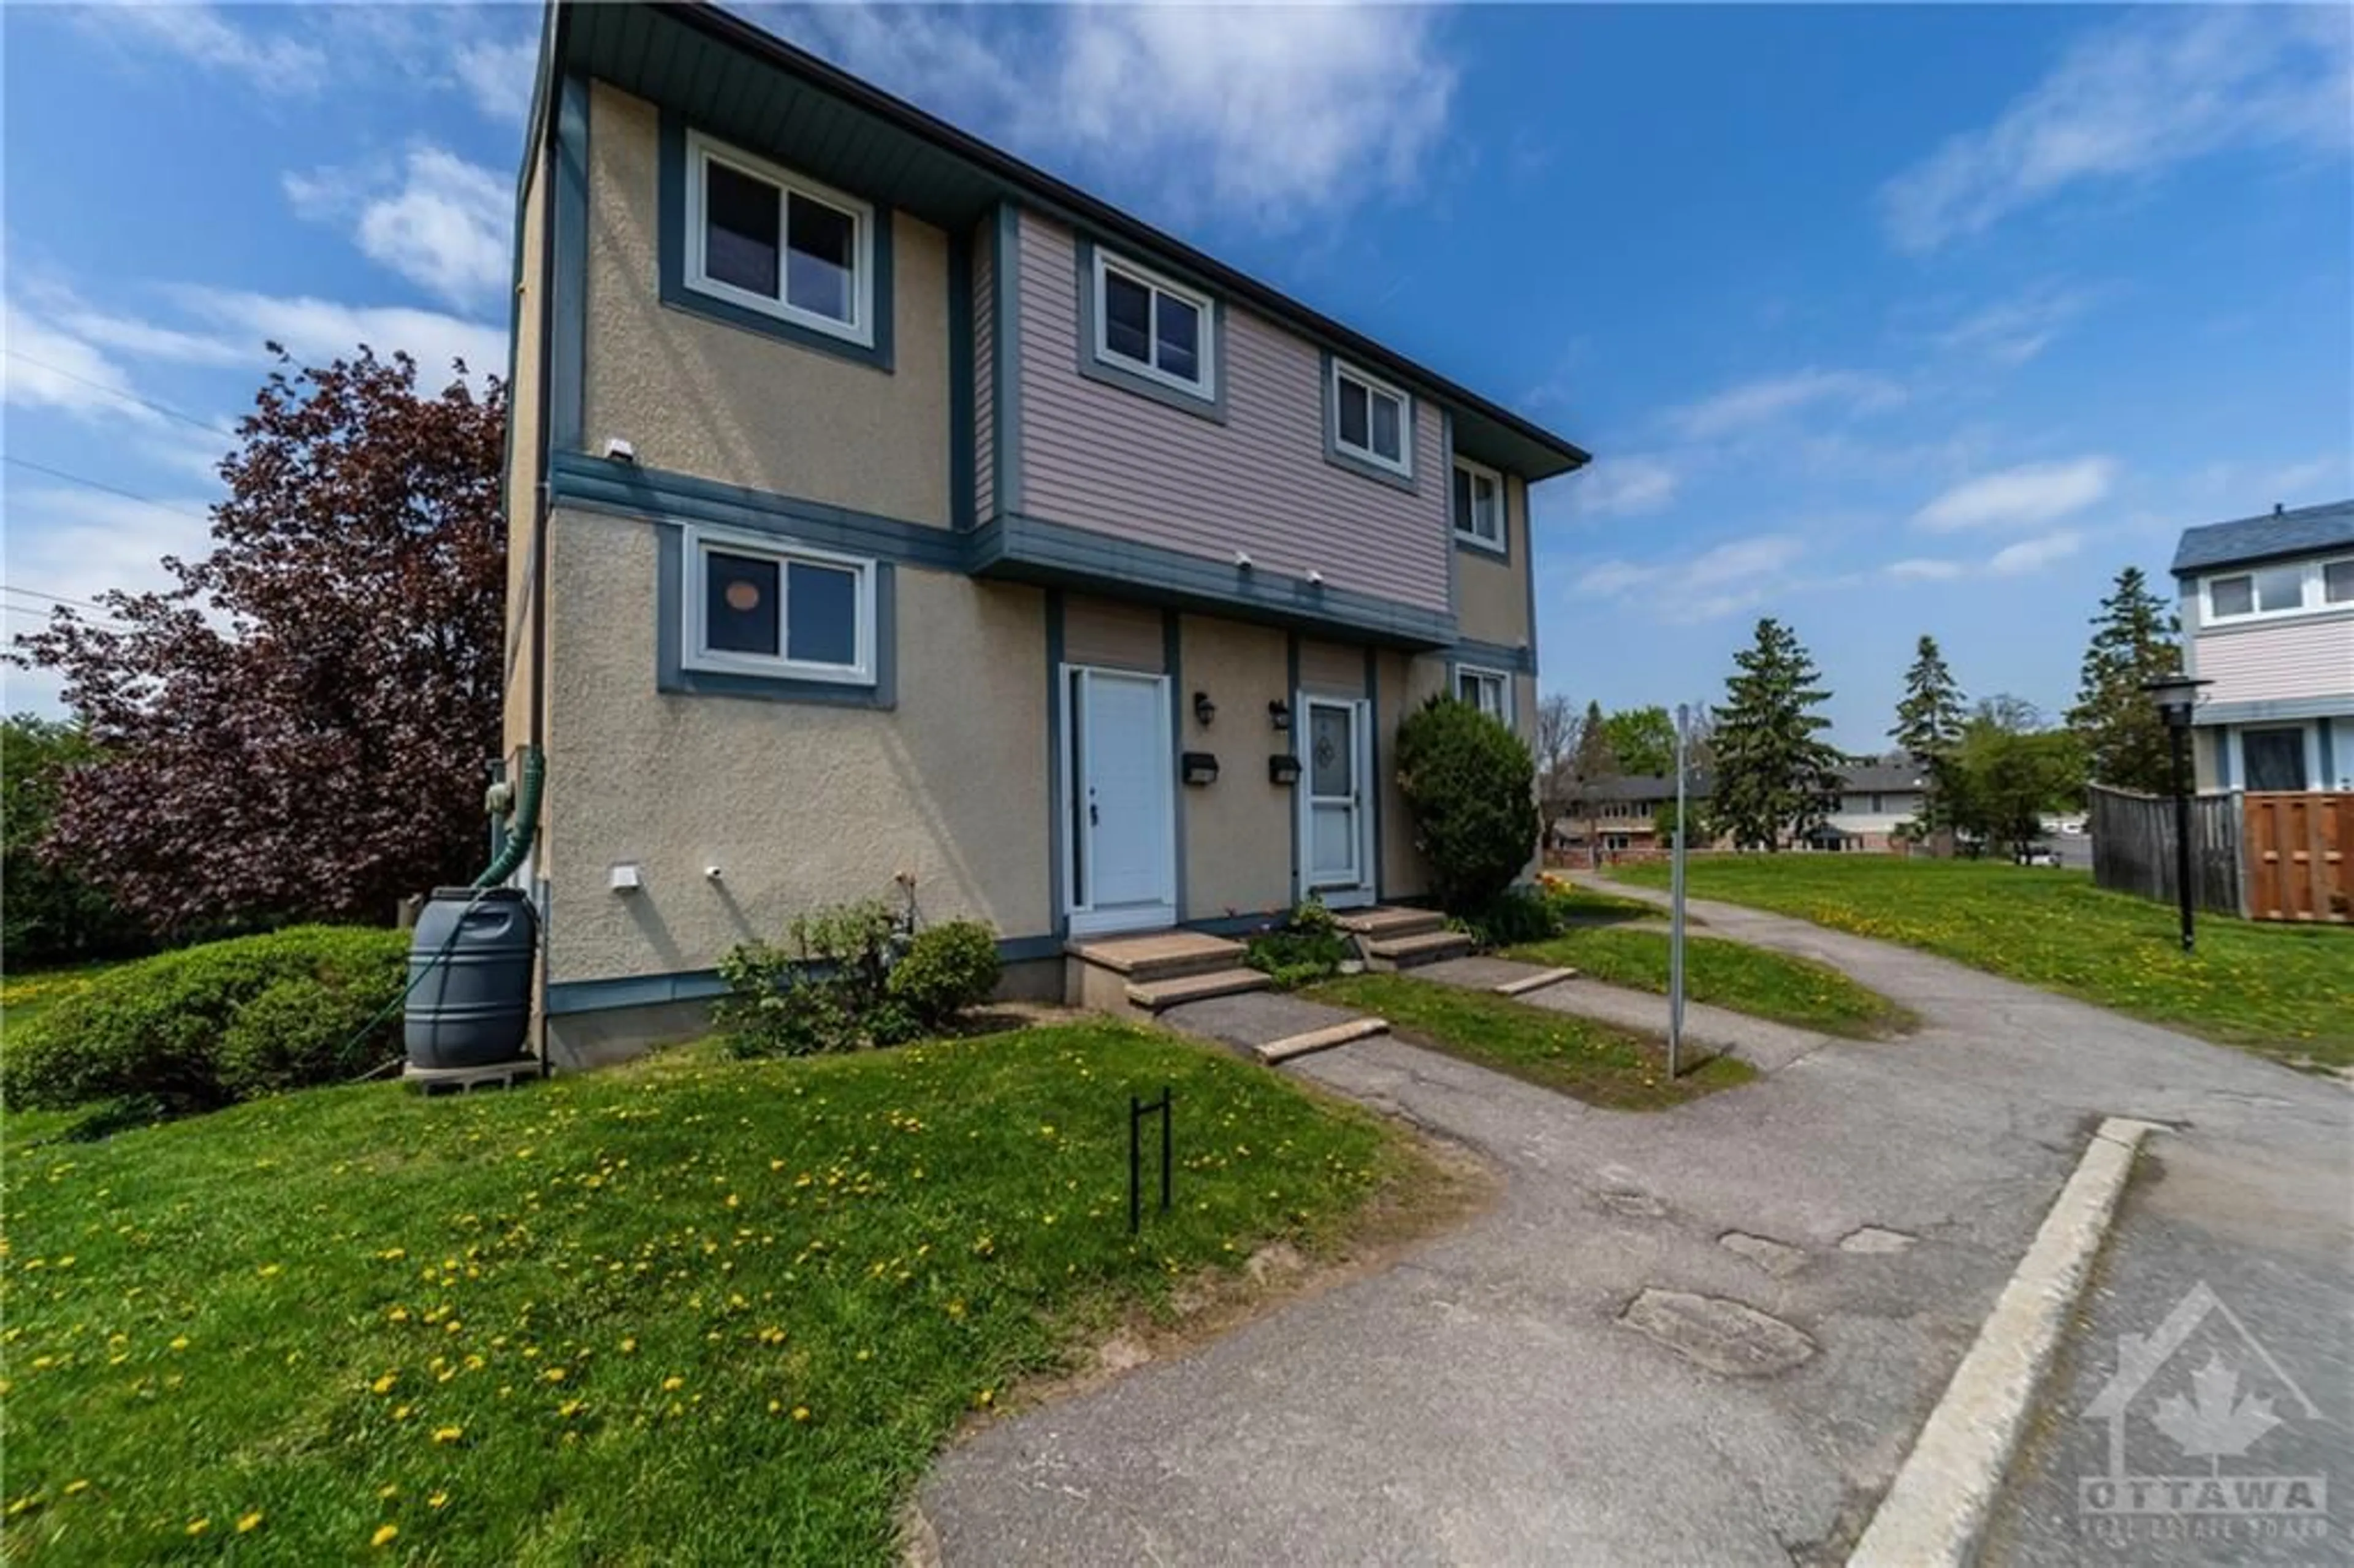 A pic from exterior of the house or condo for 3230 UPLANDS Dr #22, Ottawa Ontario K1V 0C6